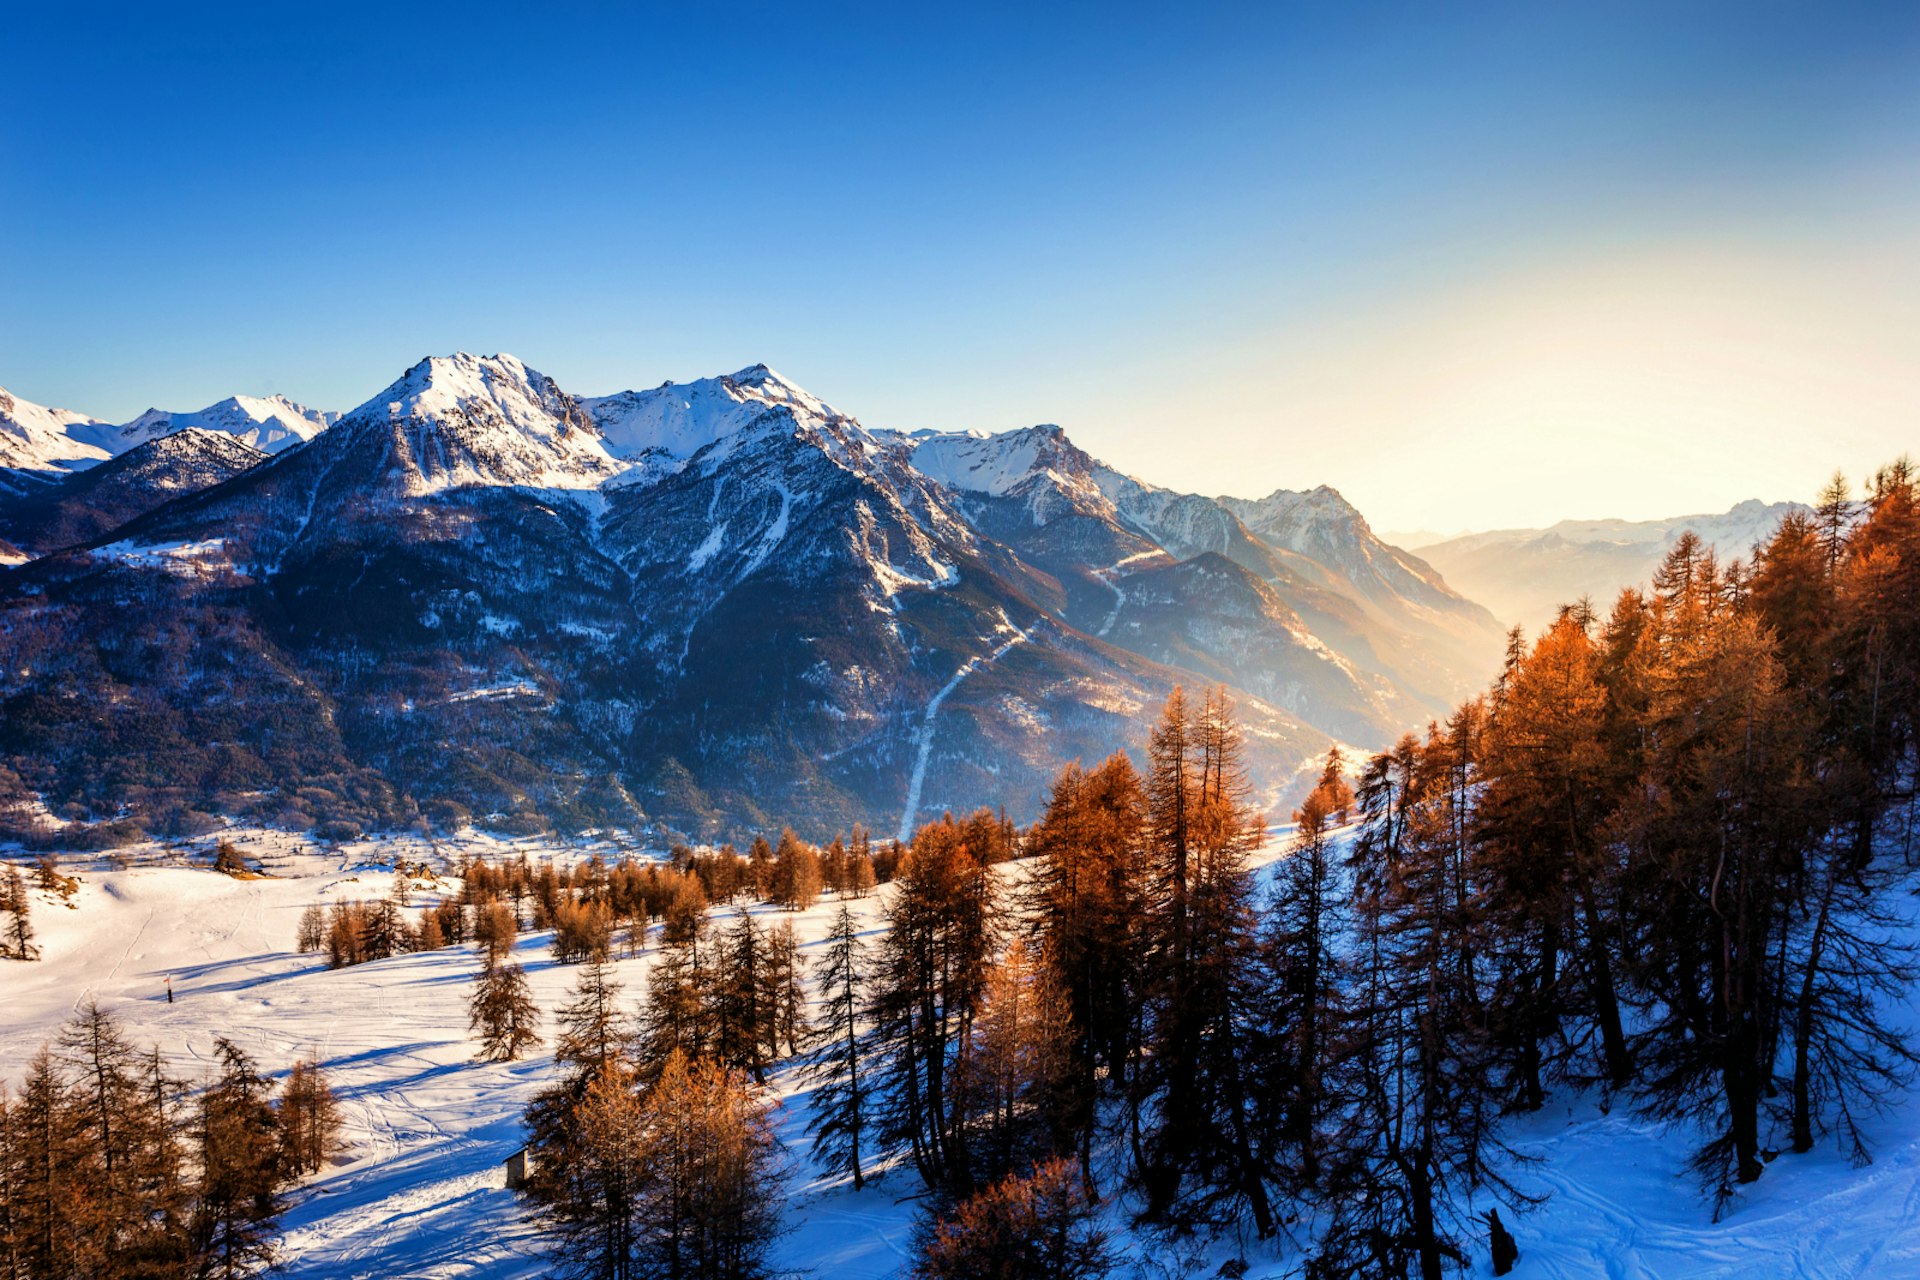 The sun sets over Briançon in the French Alps. There are sparse coniferous trees in the foreground, sitting on a blanket of snow, with rugged mountain peaks in the background, criss-crossed with trails